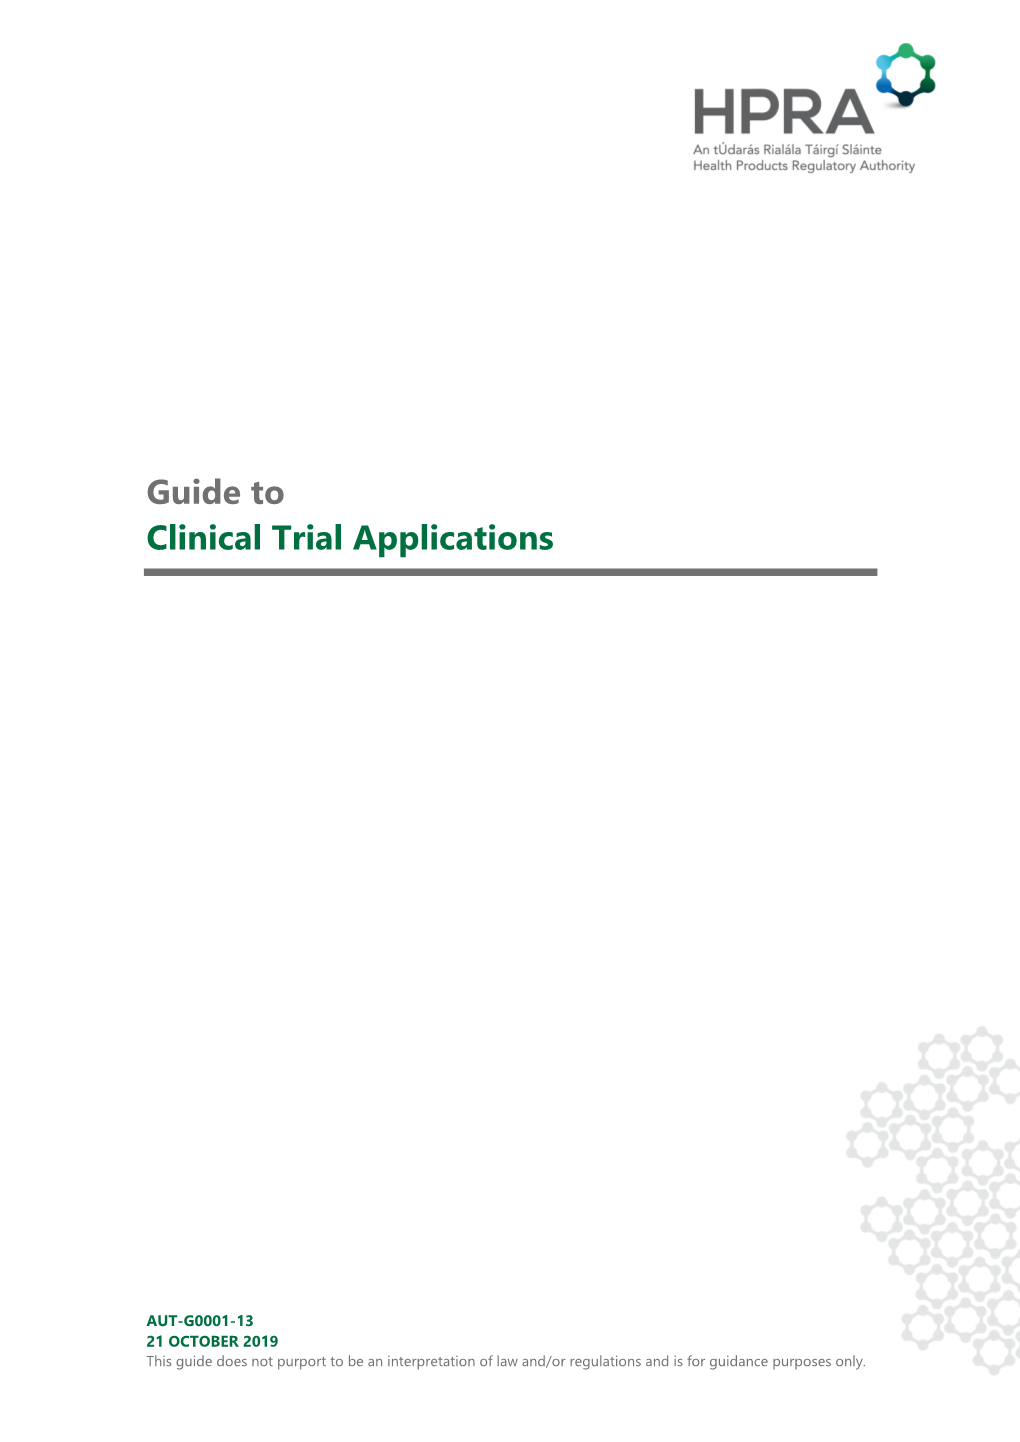 Guide to Clinical Trial Applications